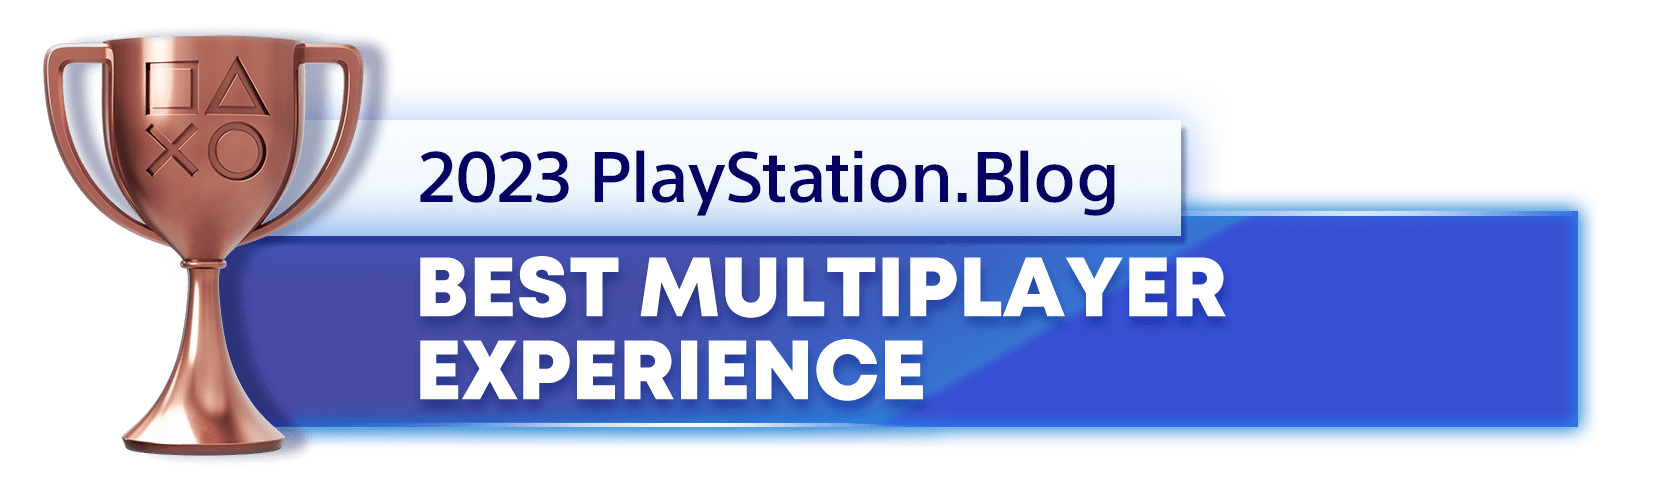 Bronze Trophy for the 2023 PlayStation Blog Best Multiplayer Experience Winner